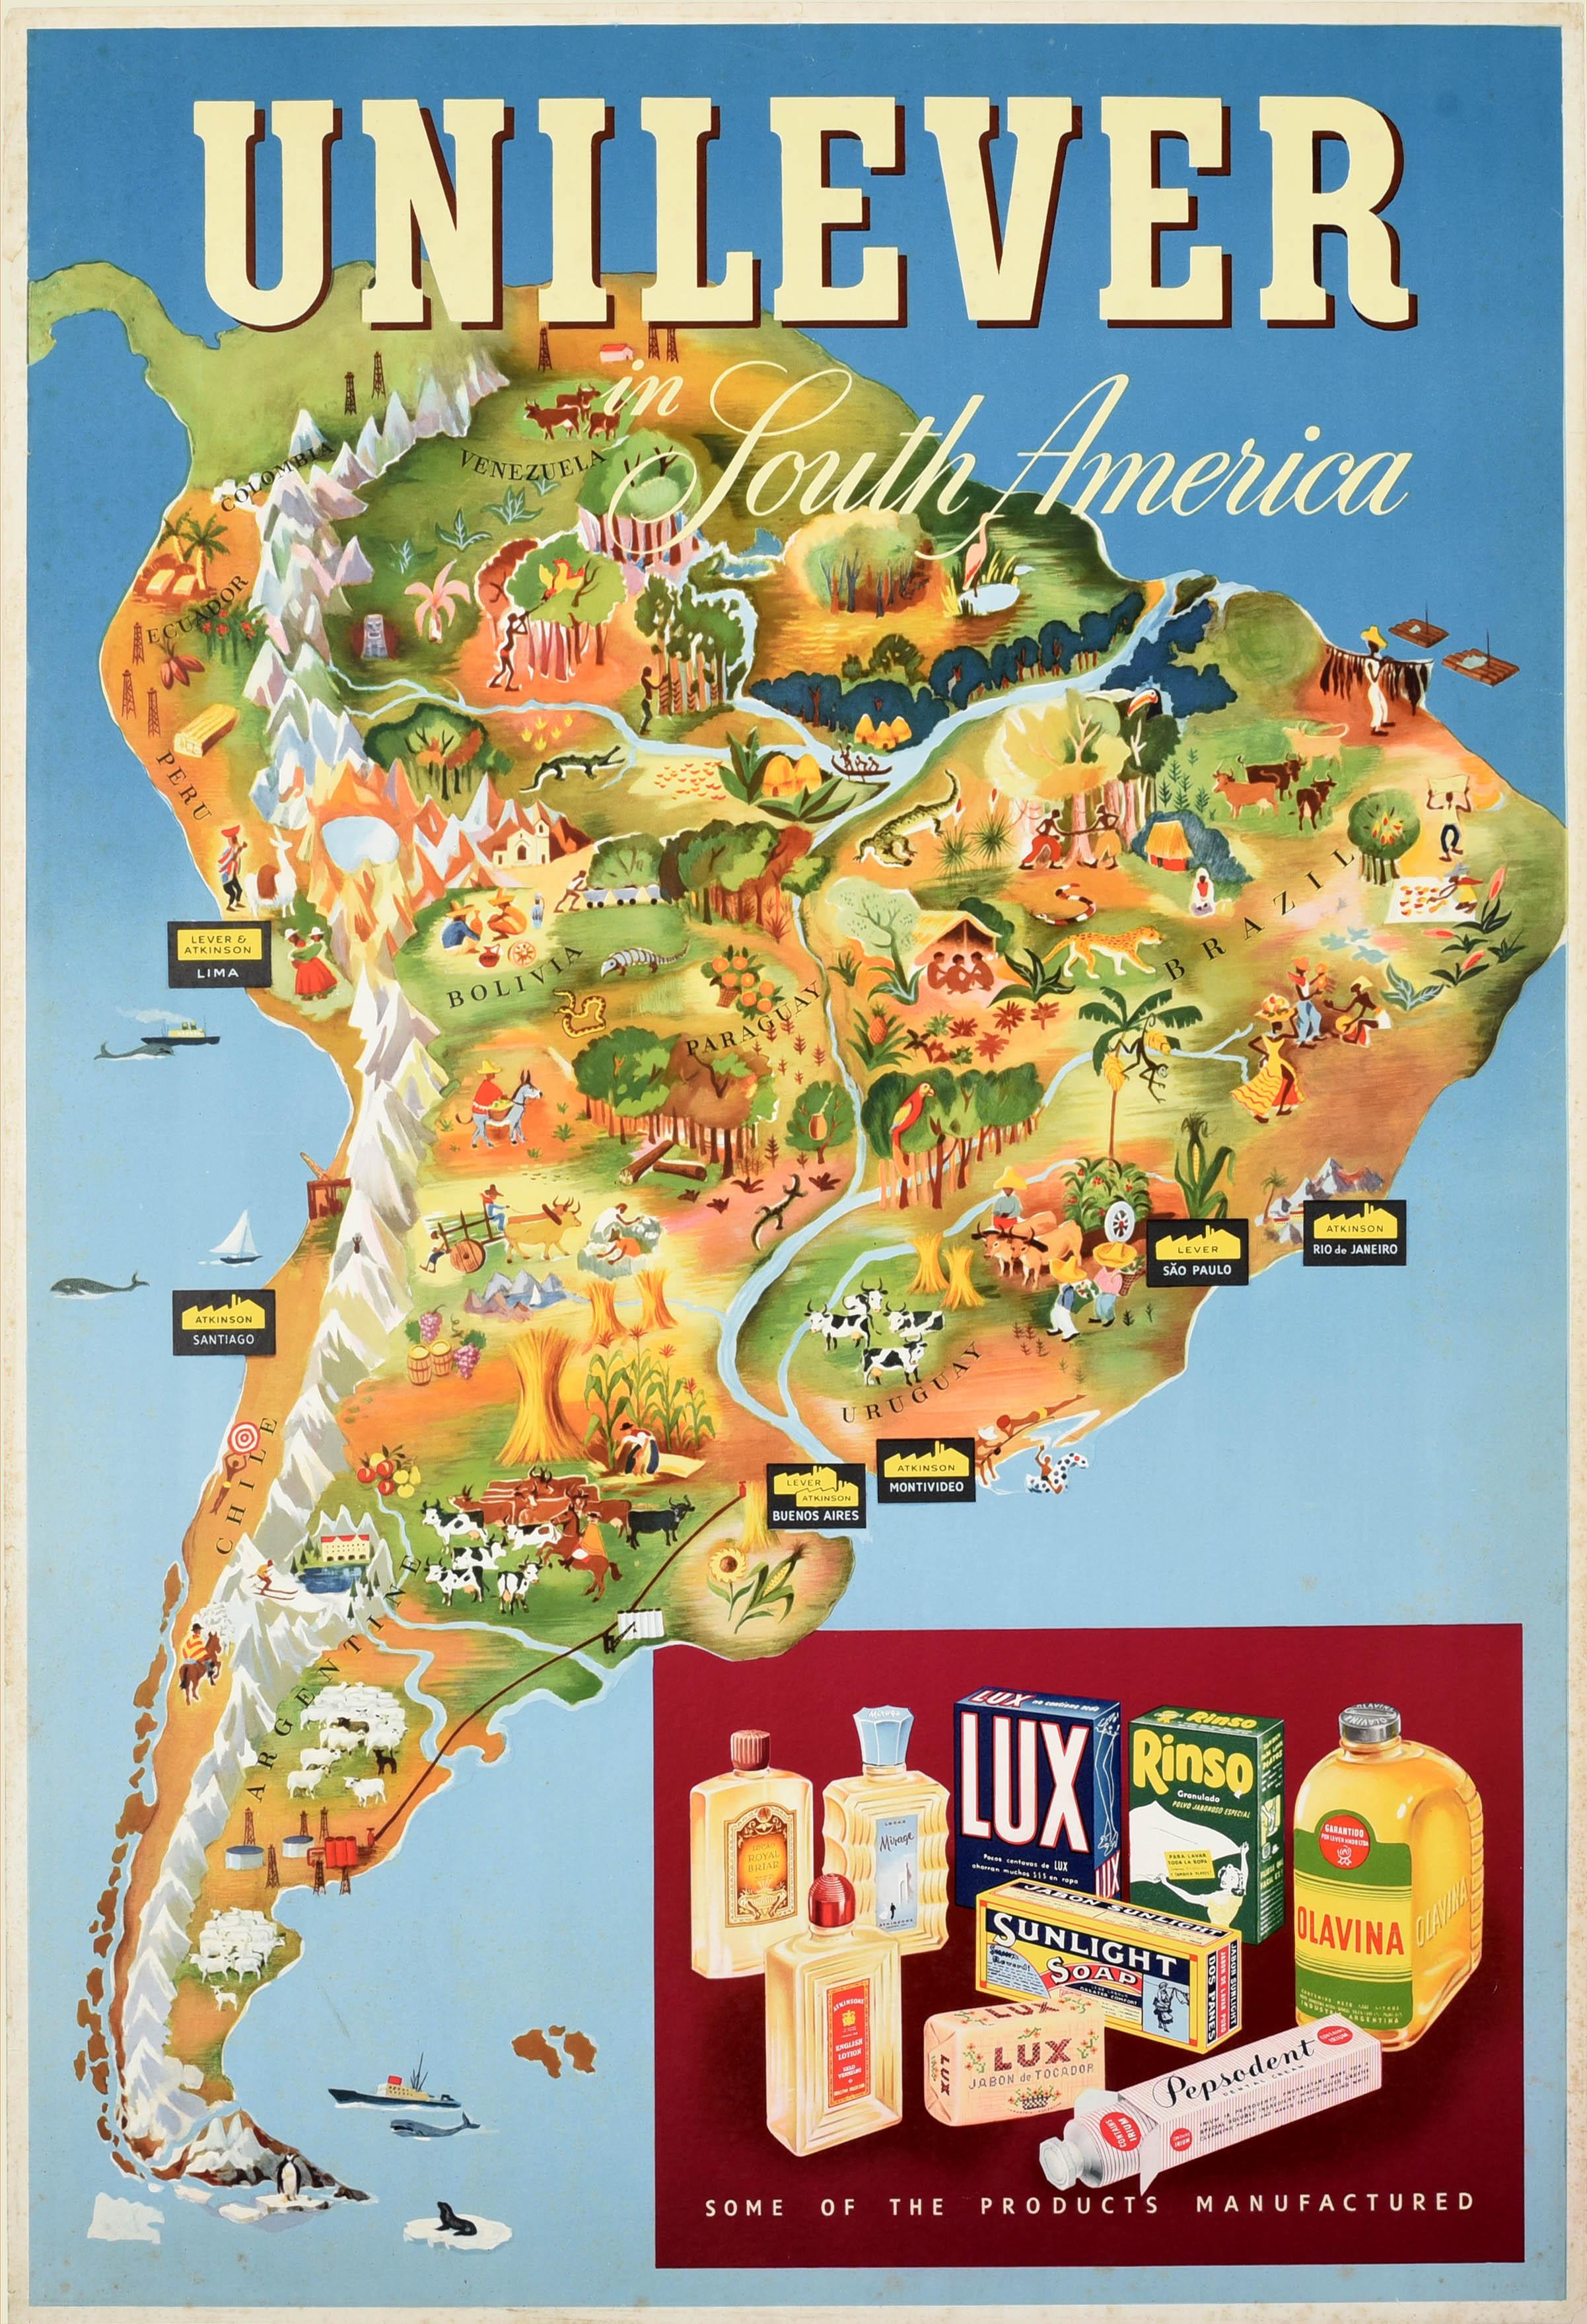 Unknown Print - Original Vintage Advertising Poster Unilever South America Illustrated Map Art